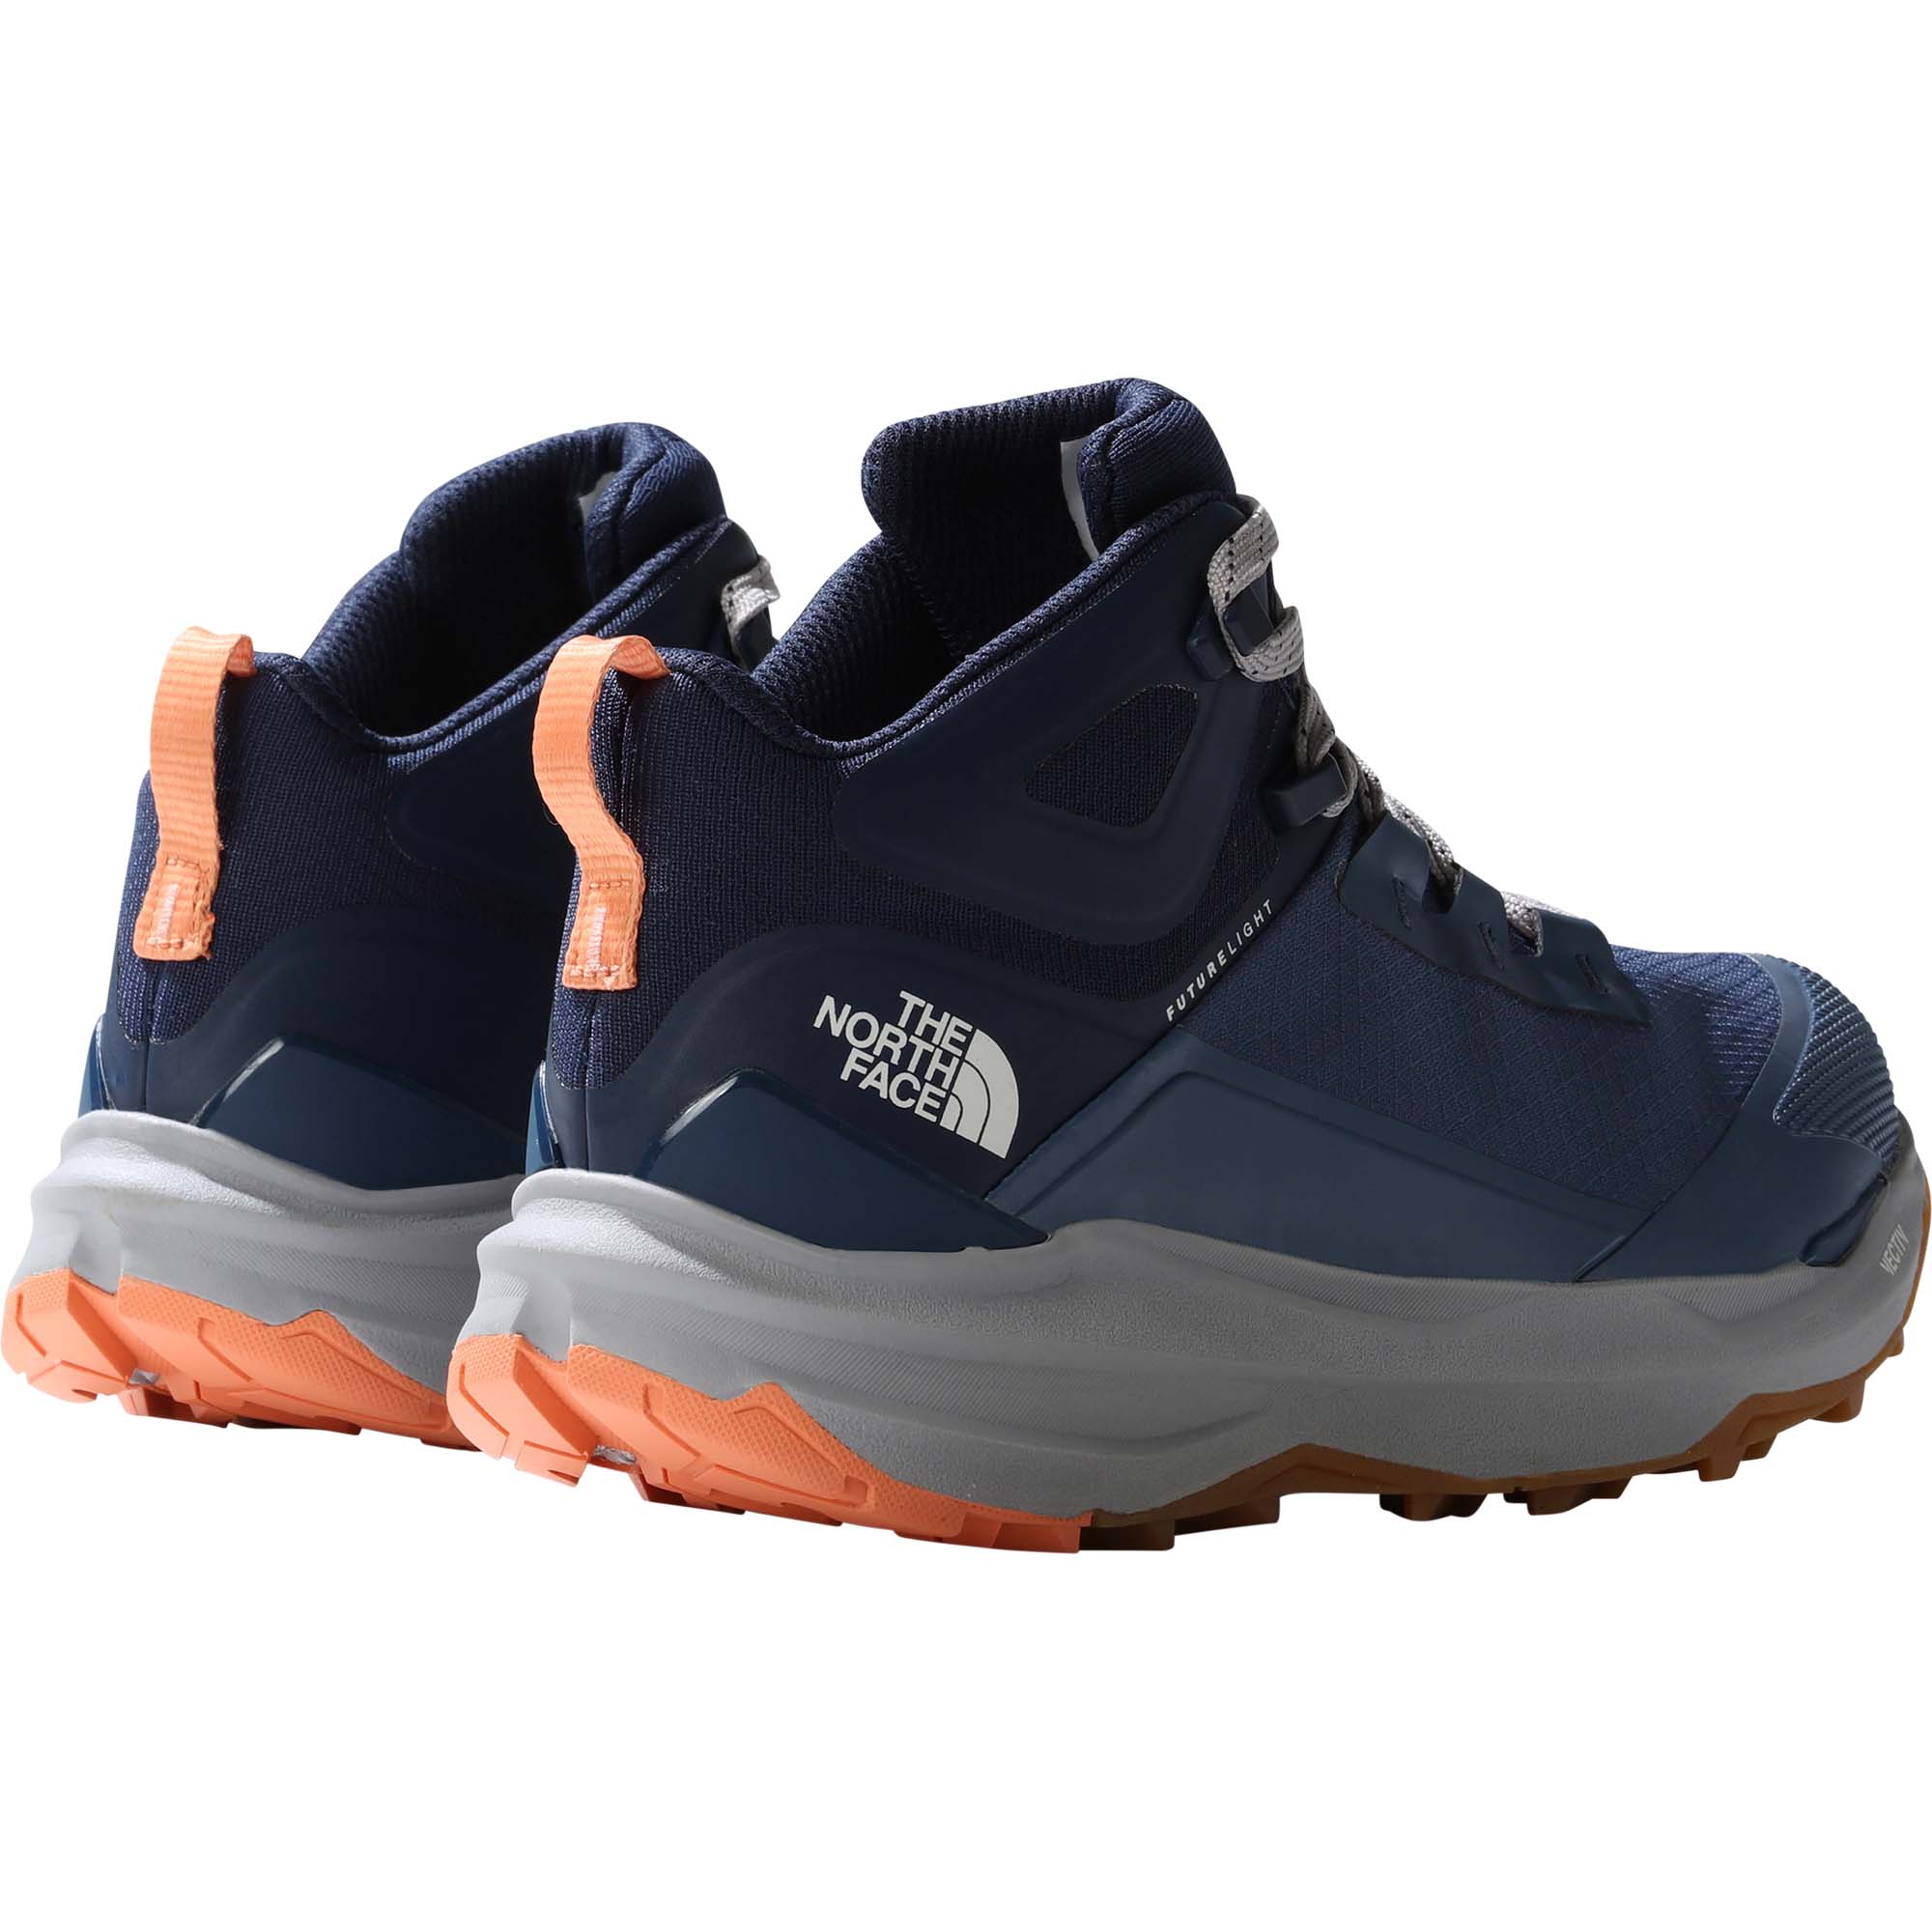 The North Face Vectiv Exploris 2 Mid FTL Women's Hiking Boots